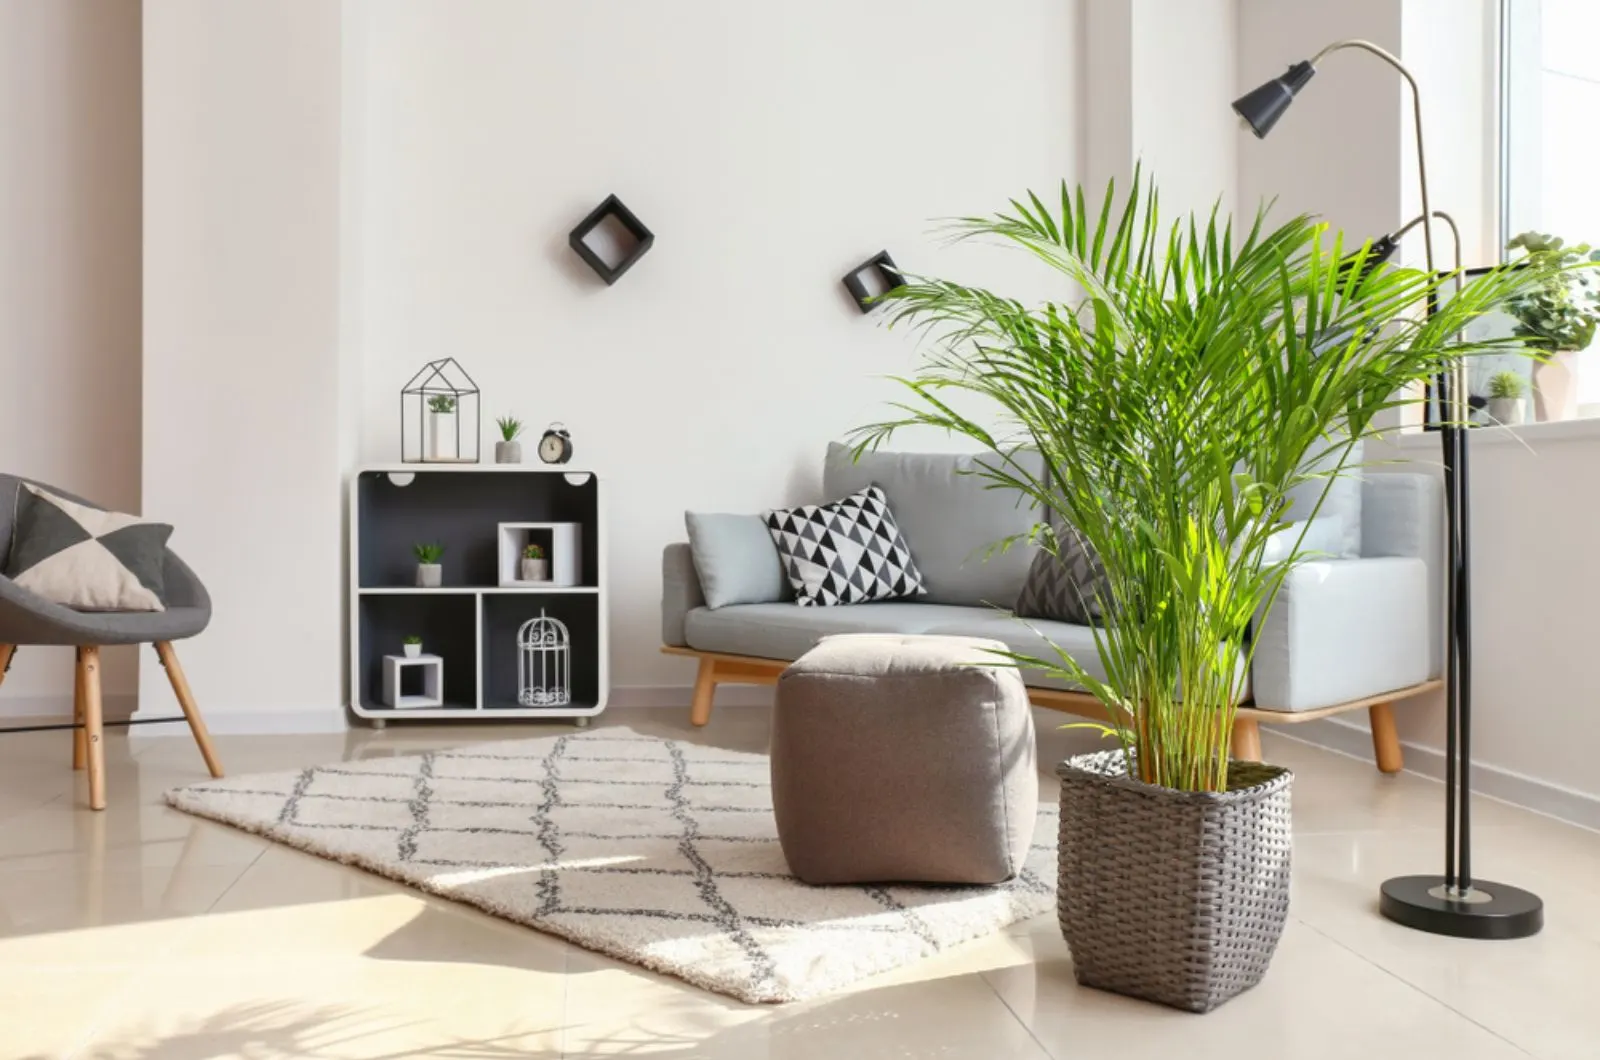 areca palm in the living room